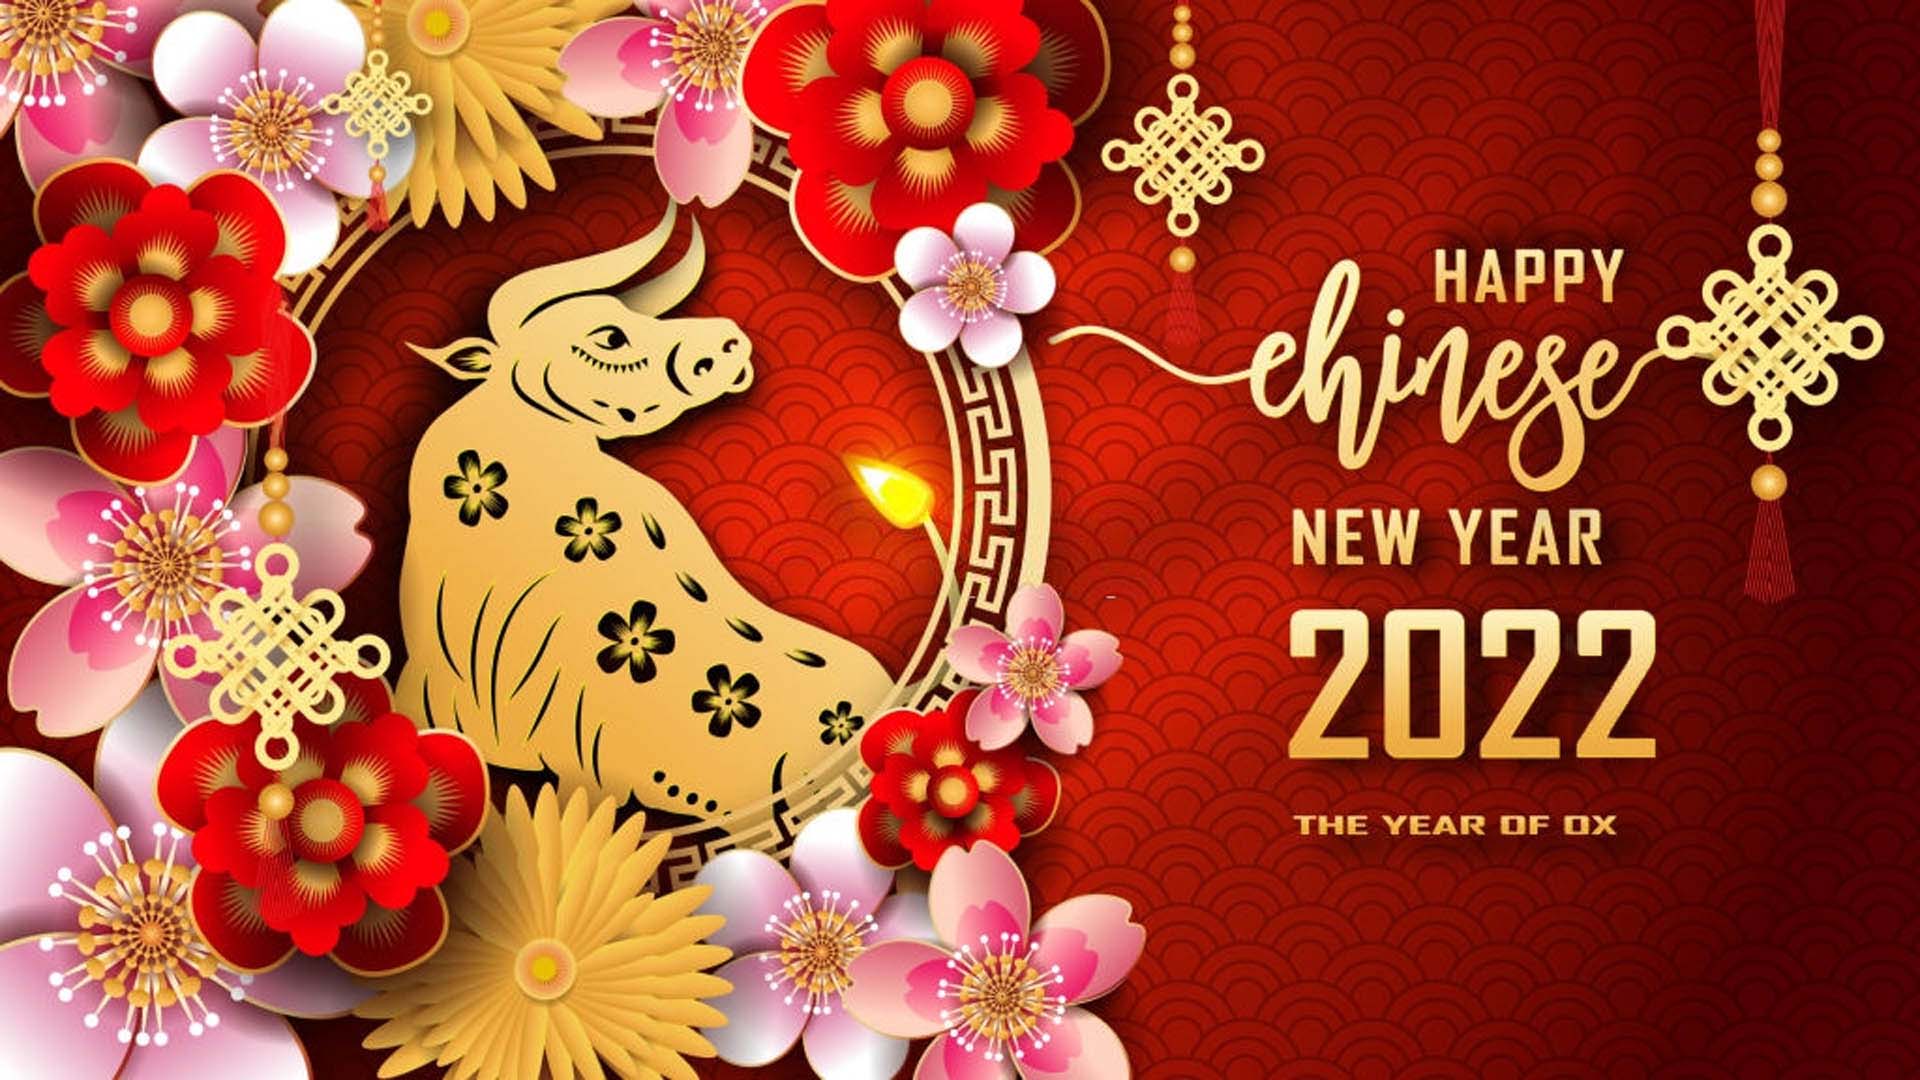 Happy Chinese New Year 2022 Red Wallpaper HD, Wallpaper13.com